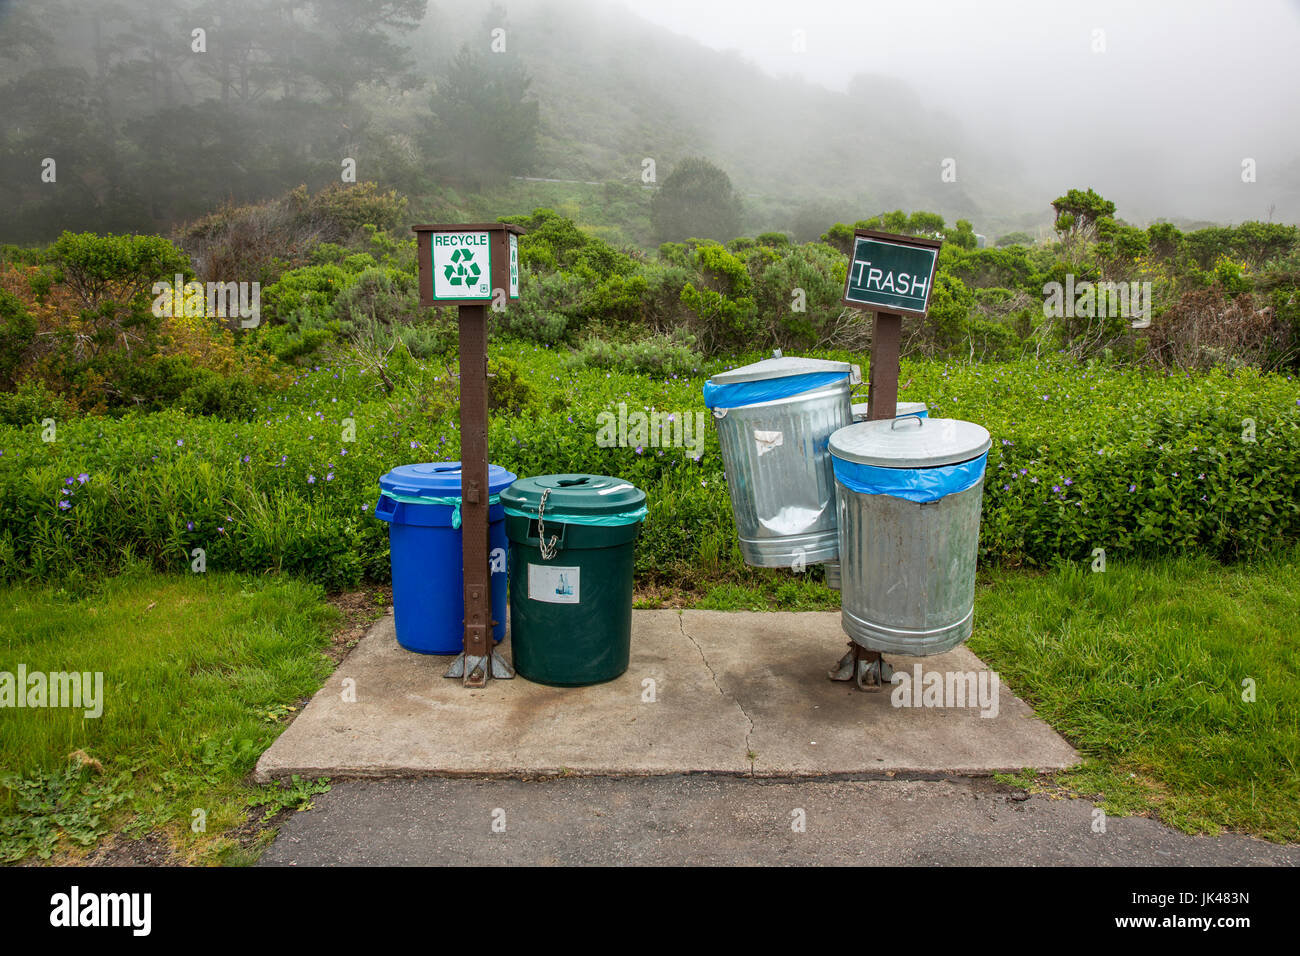 Trash and recycling bins in park Stock Photo